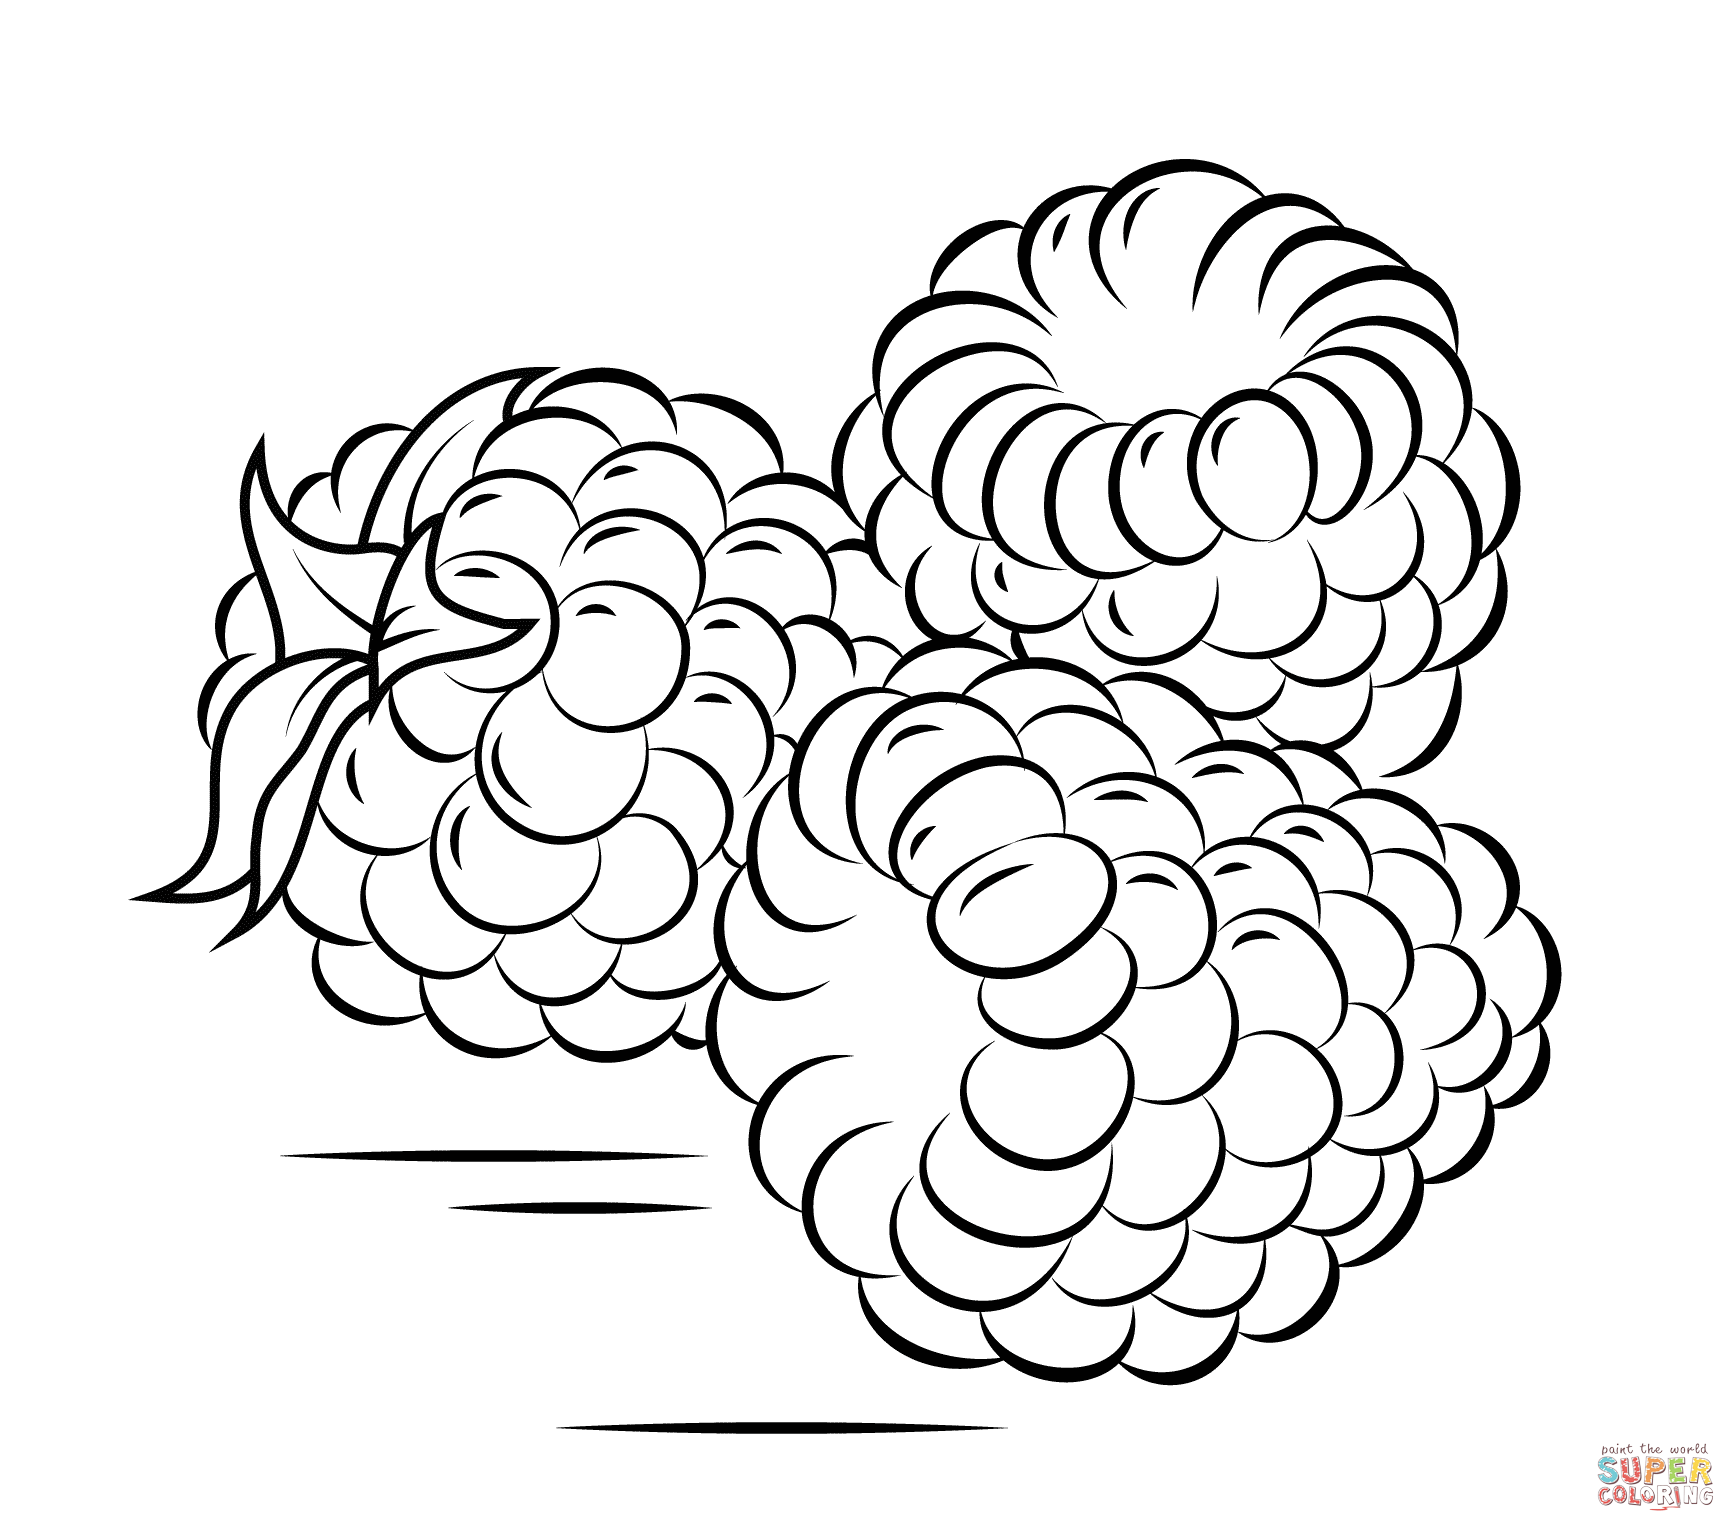 Raspberry coloring pages | Free Coloring Pages